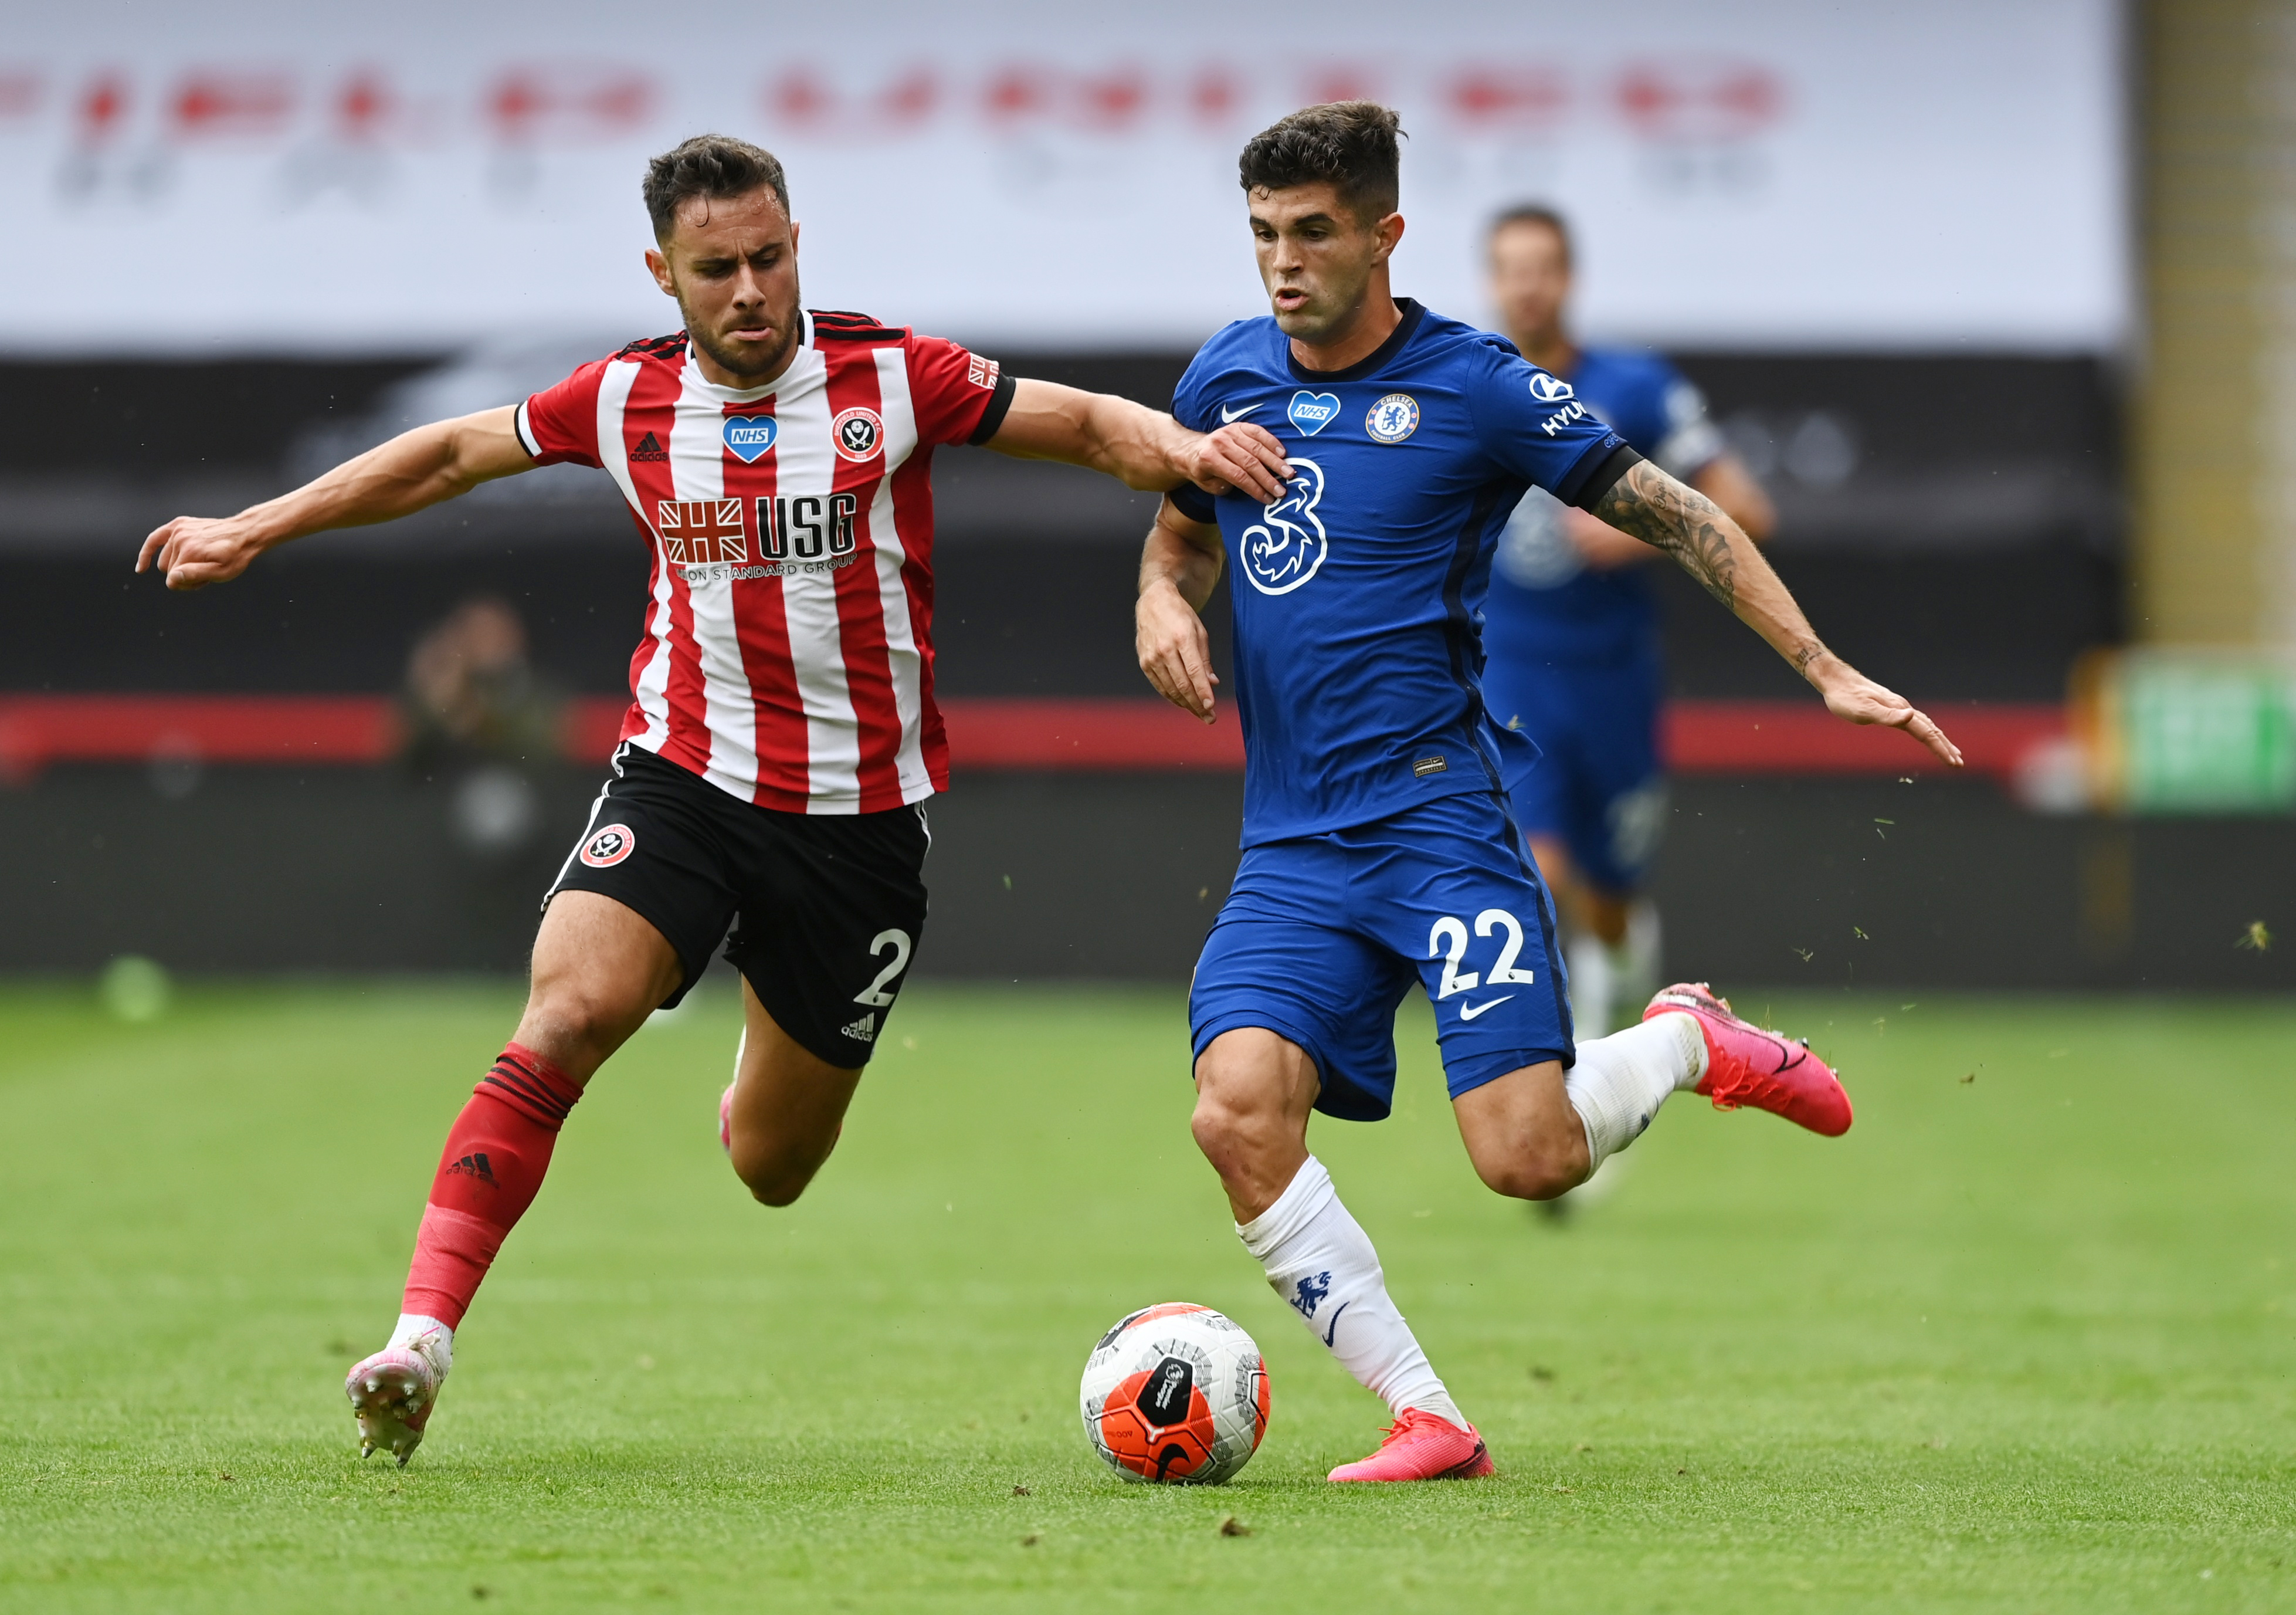 Sheffield United's George Baldock in action with Chelsea's Christian Pulisic, as play resumes behind closed doors following the outbreak of the coronavirus disease (COVID-19). Photo: Reuters